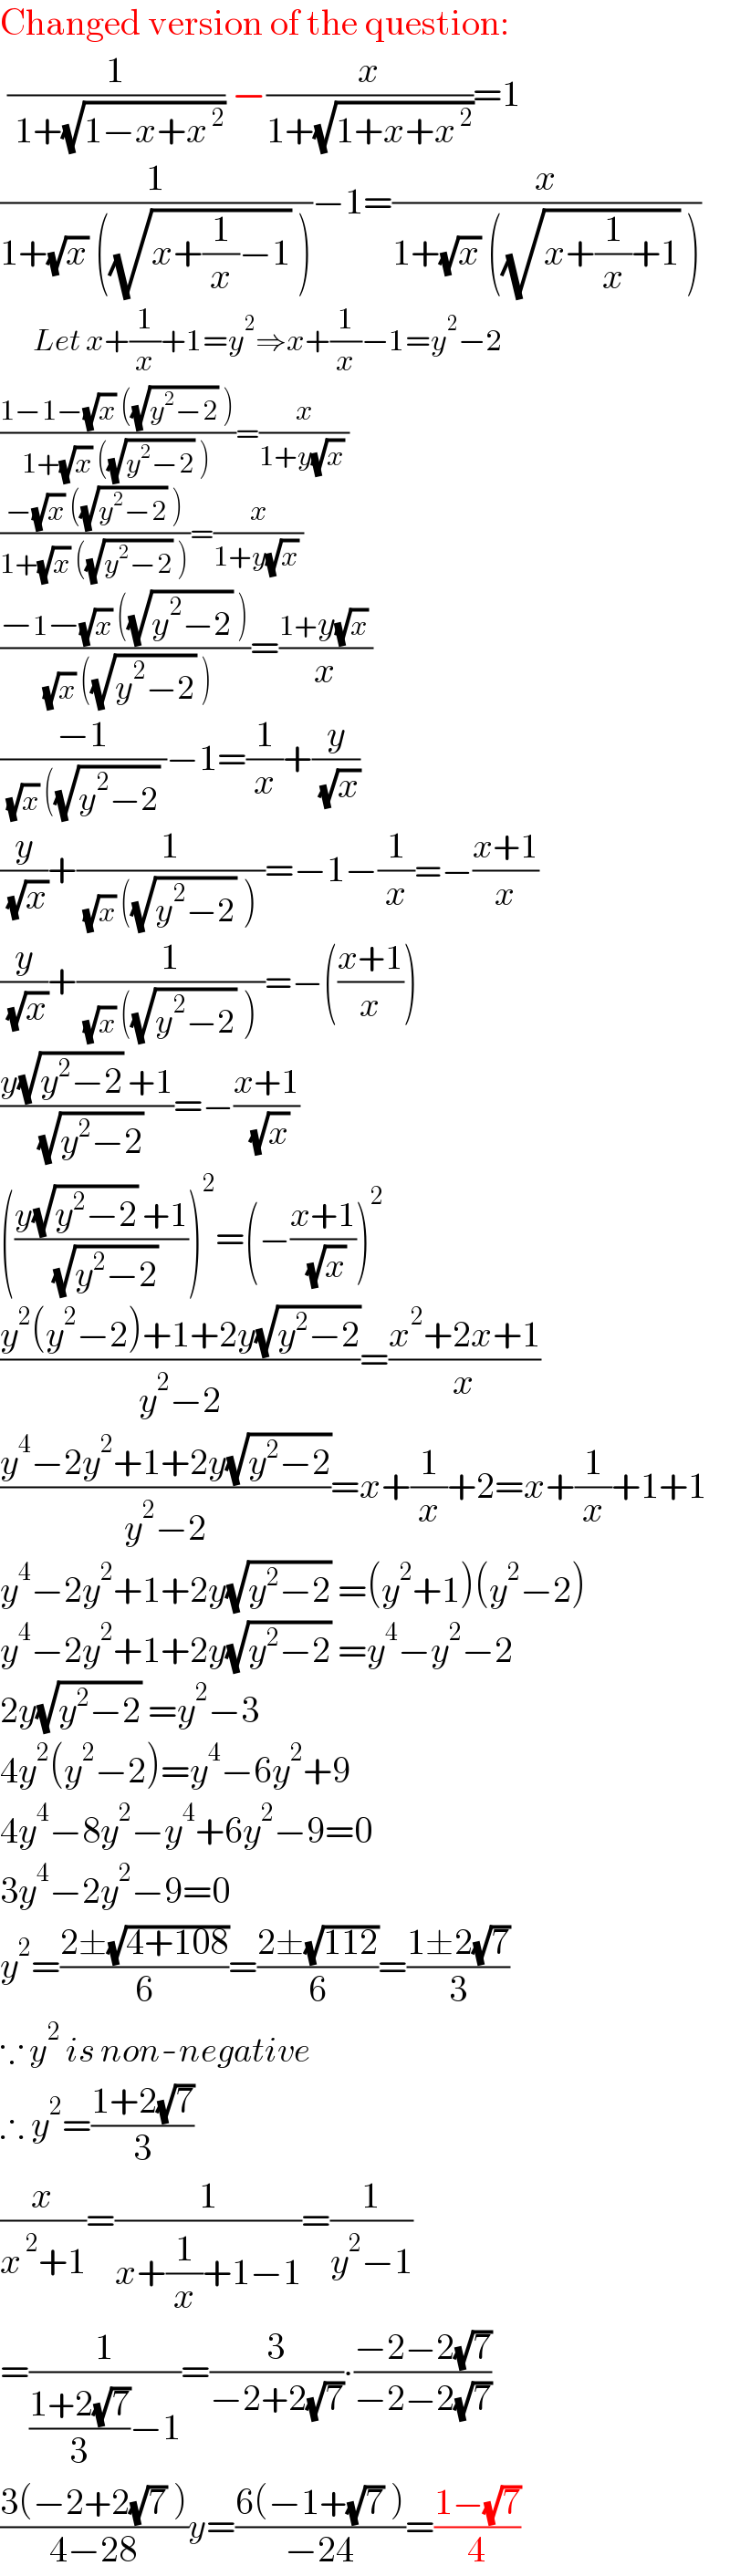 Changed version of the question:   (1/( 1+(√(1−x+x^( 2) )))) −(x/(1+(√(1+x+x^( 2) ))))=1  (1/(1+(√x) ((√(x+(1/x)−1)) )))−1=(x/(1+(√x) ((√(x+(1/x)+1)) )))        Let x+(1/x)+1=y^2 ⇒x+(1/x)−1=y^2 −2  ((1−1−(√x) ((√(y^2 −2)) ))/(1+(√x) ((√(y^2 −2)) )))=(x/(1+y(√x) ))  ((−(√x) ((√(y^2 −2)) ))/(1+(√x) ((√(y^2 −2)) )))=(x/(1+y(√x) ))  ((−1−(√x) ((√(y^2 −2)) ))/( (√x) ((√(y^2 −2)) )))=((1+y(√x) )/x)  ((−1)/( (√x) ((√(y^2 −2)) ))−1=(1/x)+(y/( (√x)))  (y/( (√x)))+(1/( (√x) ((√(y^2 −2)) ) ))=−1−(1/x)=−((x+1)/x)  (y/( (√x)))+(1/( (√x) ((√(y^2 −2)) ) ))=−(((x+1)/x))  ((y(√(y^2 −2)) +1)/( (√(y^2 −2))))=−((x+1)/( (√x)))  (((y(√(y^2 −2)) +1)/( (√(y^2 −2)))))^2 =(−((x+1)/( (√x))))^2   ((y^2 (y^2 −2)+1+2y(√(y^2 −2)))/(y^2 −2))=((x^2 +2x+1)/x)  ((y^4 −2y^2 +1+2y(√(y^2 −2)))/(y^2 −2))=x+(1/x)+2=x+(1/x)+1+1  y^4 −2y^2 +1+2y(√(y^2 −2)) =(y^2 +1)(y^2 −2)  y^4 −2y^2 +1+2y(√(y^2 −2)) =y^4 −y^2 −2  2y(√(y^2 −2)) =y^2 −3  4y^2 (y^2 −2)=y^4 −6y^2 +9  4y^4 −8y^2 −y^4 +6y^2 −9=0  3y^4 −2y^2 −9=0  y^2 =((2±(√(4+108)))/6)=((2±(√(112)))/6)=((1±2(√7))/3)  ∵ y^2  is non-negative  ∴ y^2 =((1+2(√7))/3)  (x/(x^( 2) +1))=(1/(x+(1/x)+1−1))=(1/(y^2 −1))  =(1/(((1+2(√7))/3)−1))=(3/(−2+2(√7)))∙((−2−2(√7))/(−2−2(√7)))  ((3(−2+2(√7) ))/(4−28))y=((6(−1+(√7) ))/(−24))=((1−(√7))/4)  